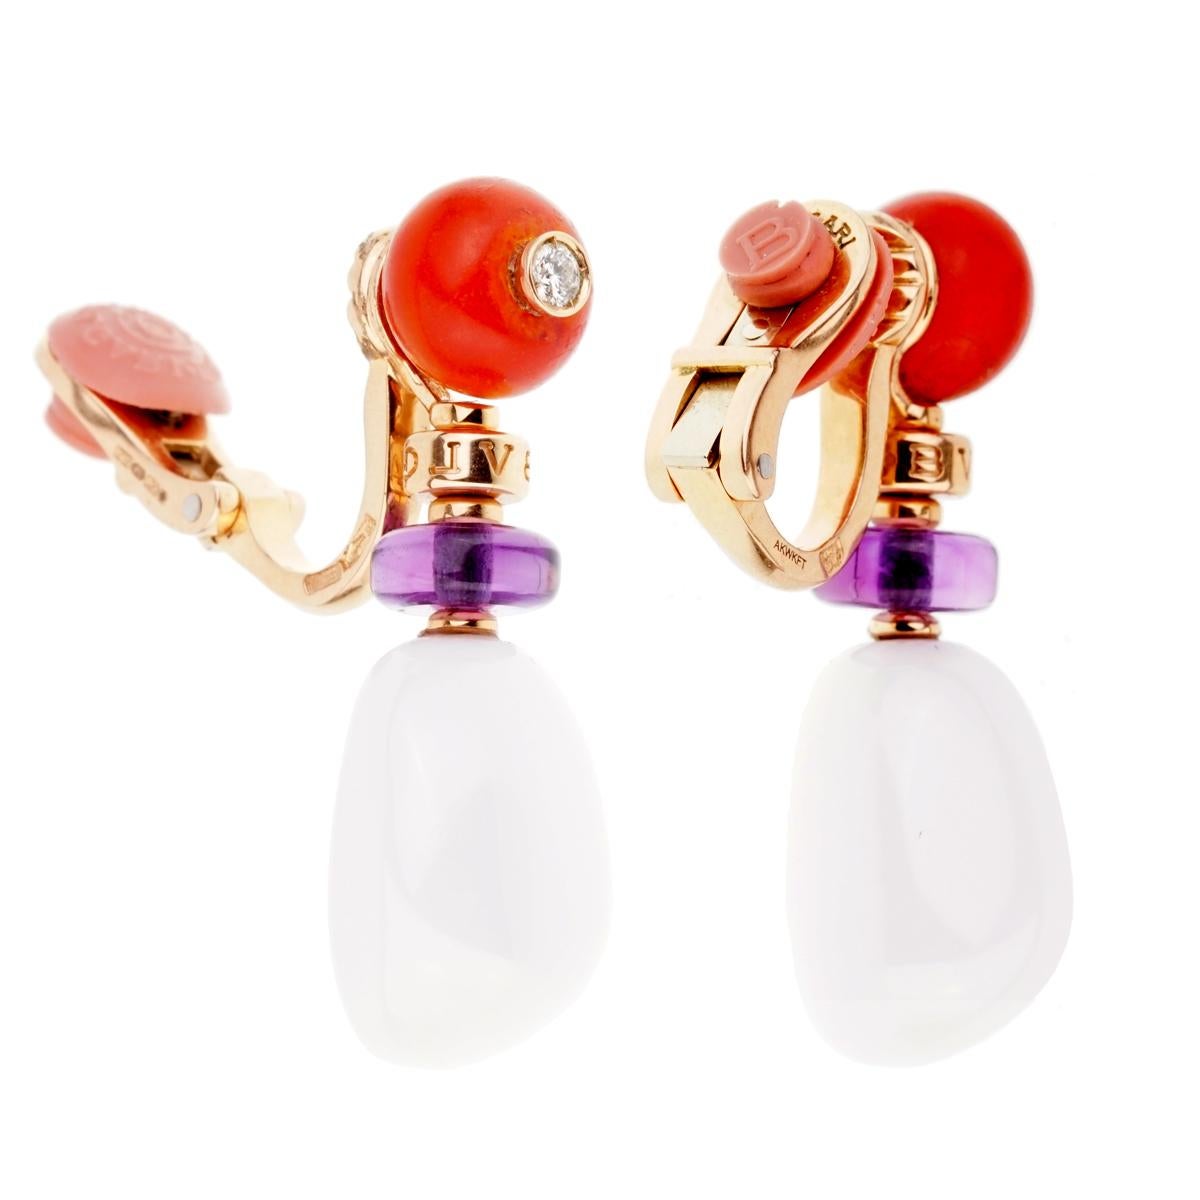 A magnificent pair of Bulgari Mediterranean Eden earrings featuring coral, amethyst, and white agate enhanced with a beautiful round brilliant cut diamond in the coral set in 18k rose gold.

Width: .50